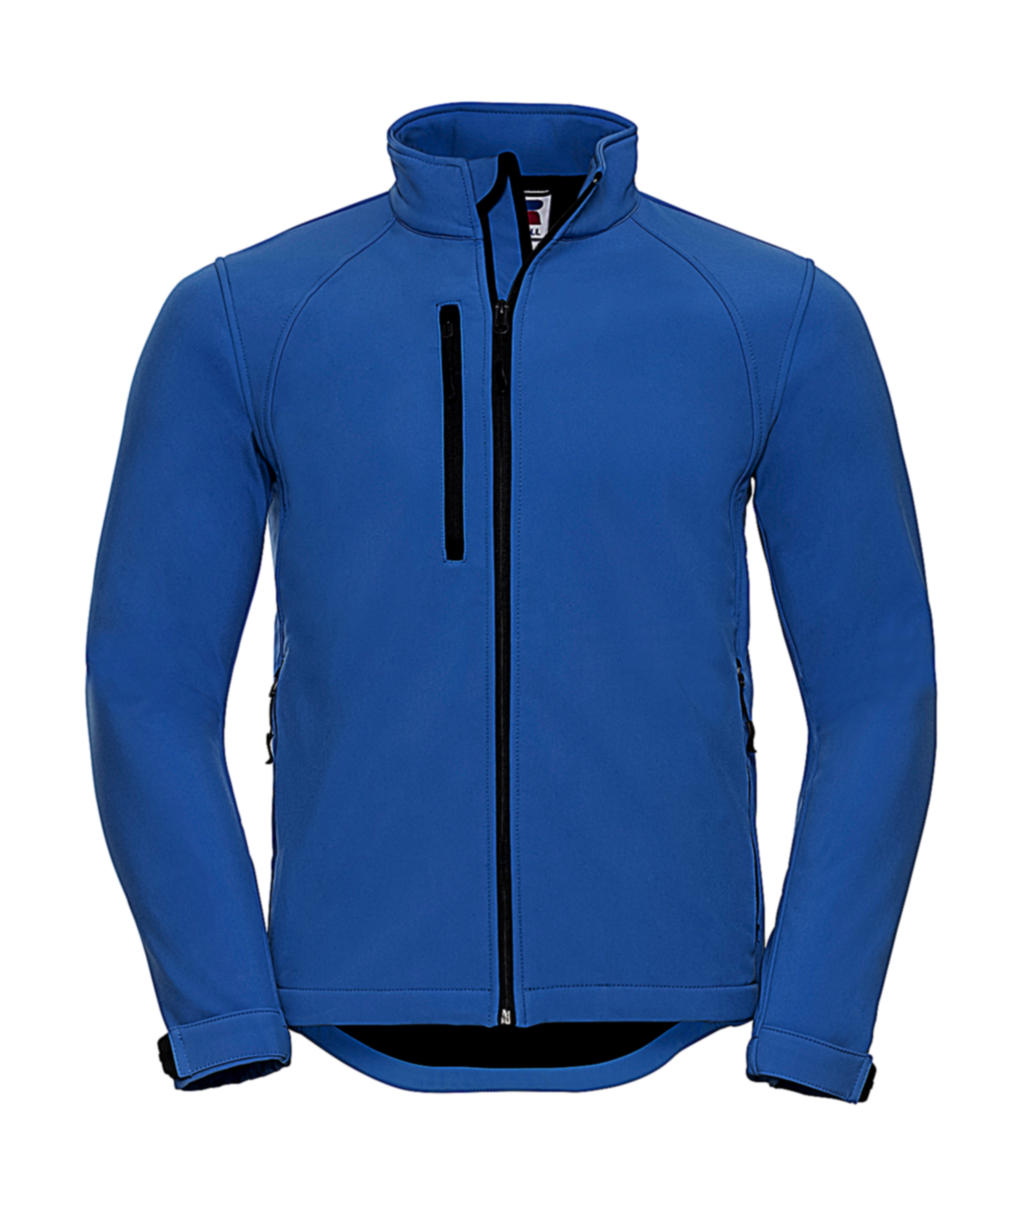  Softshell Jacket in Farbe Azure